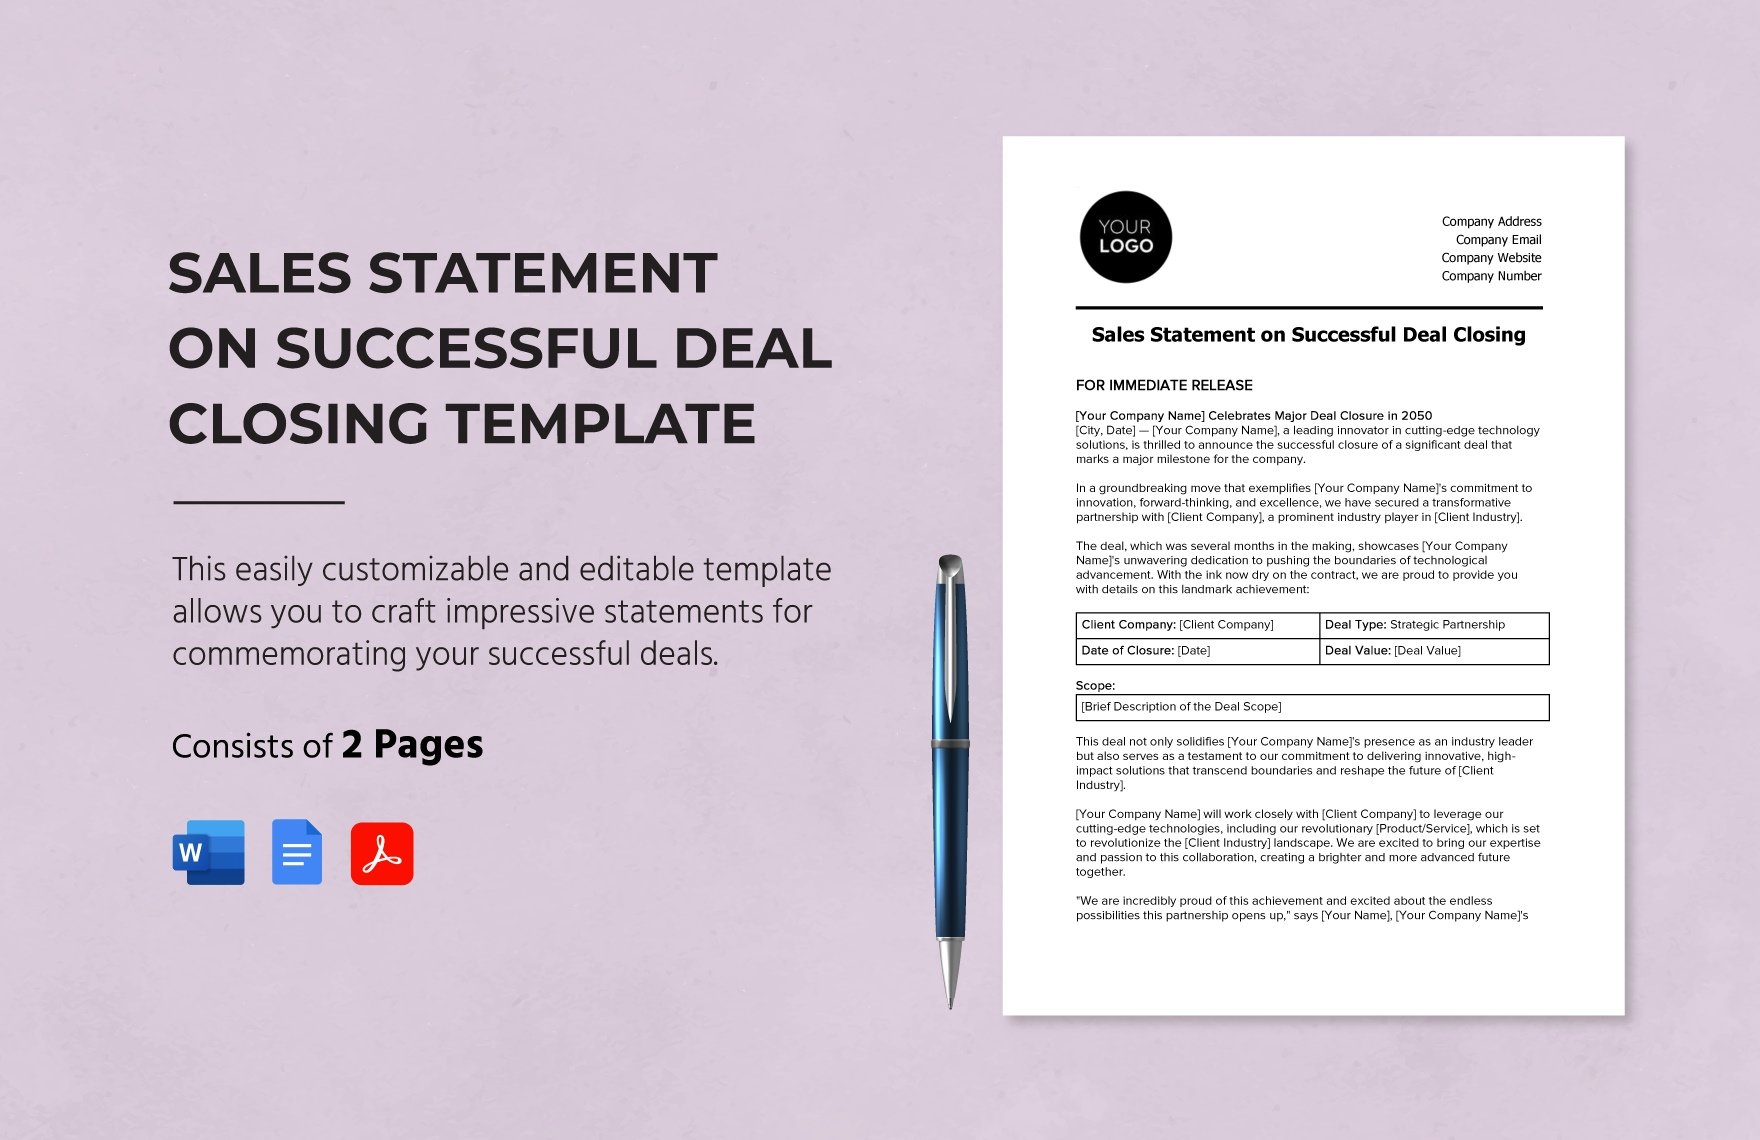 Sales Statement on Successful Deal Closing Template